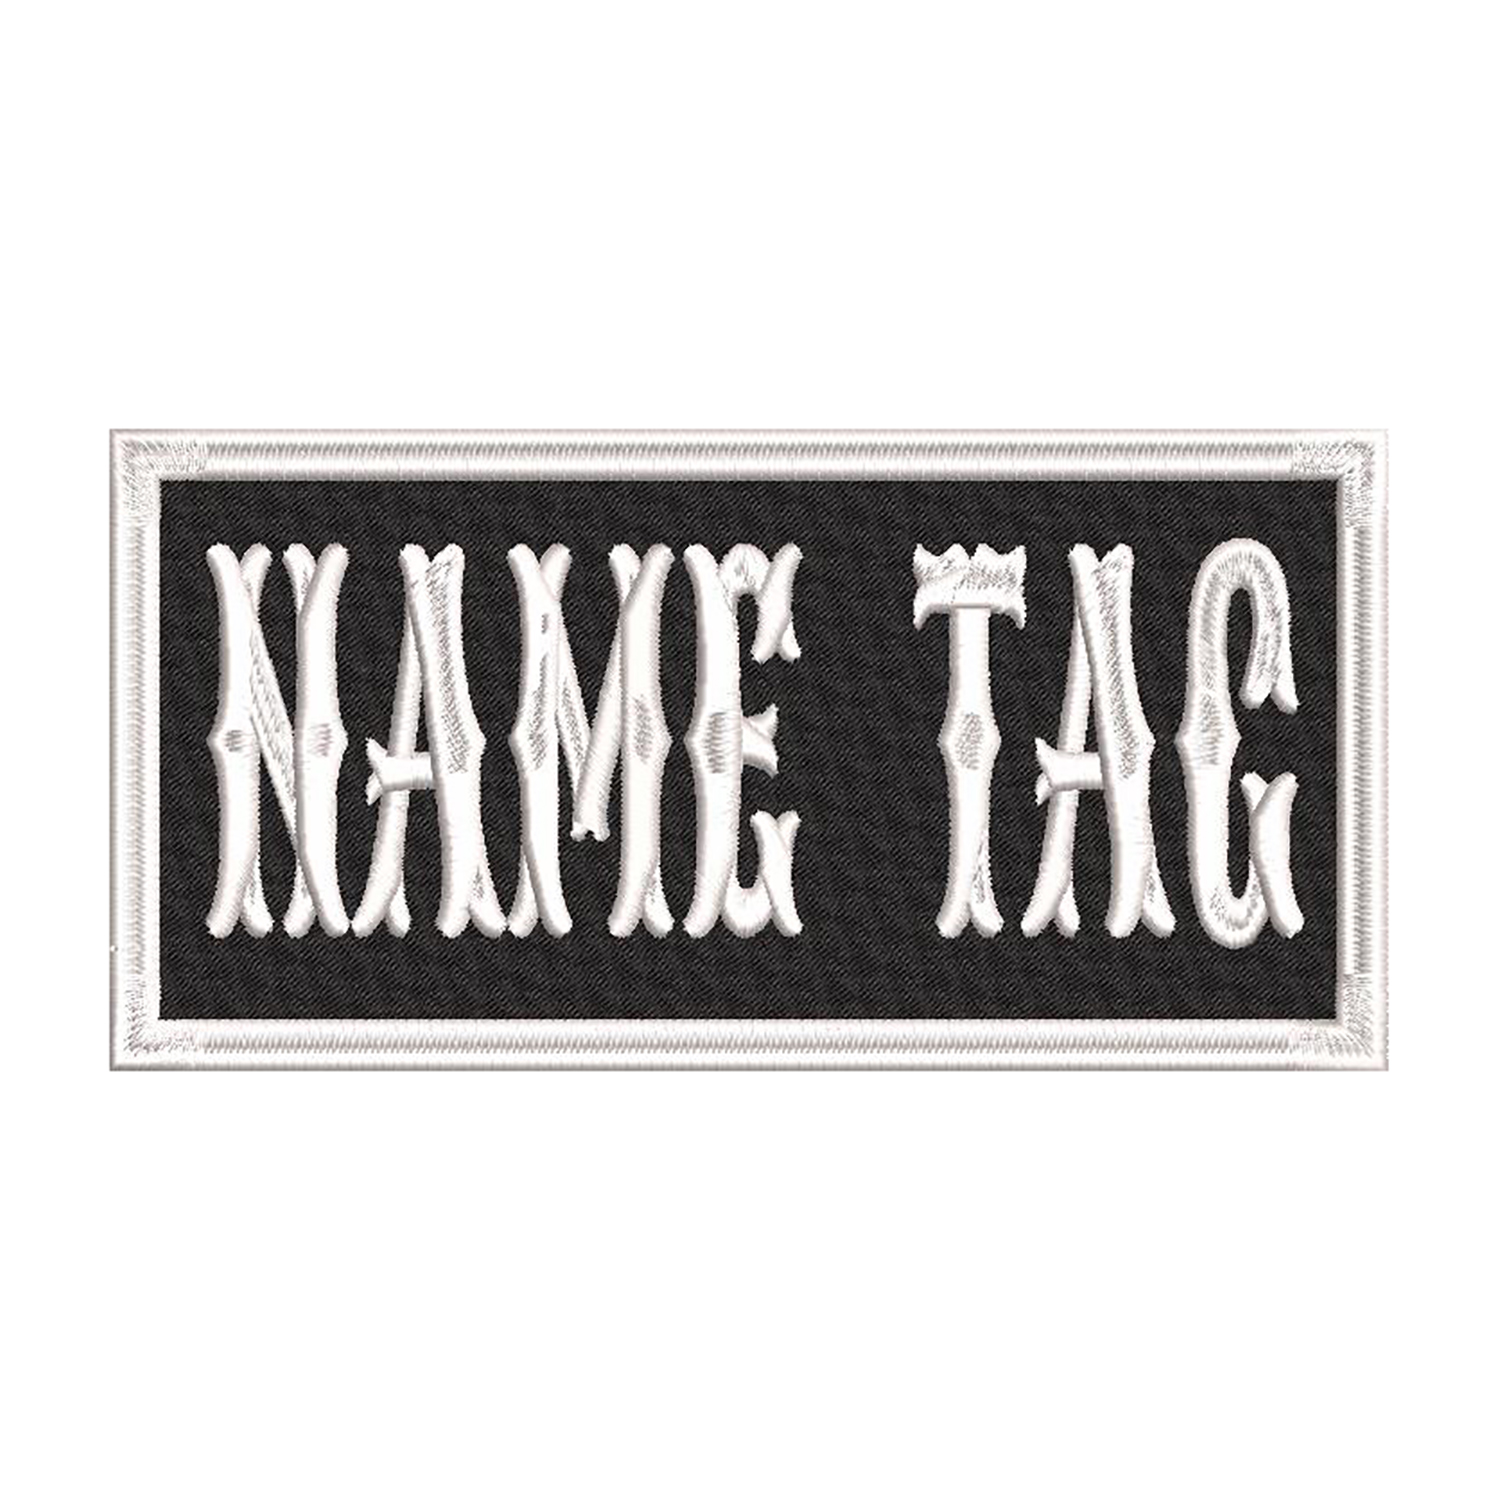 Rectangular 1 Line Custom Embroidered Name Tag Sew on Patch 3 (Small)